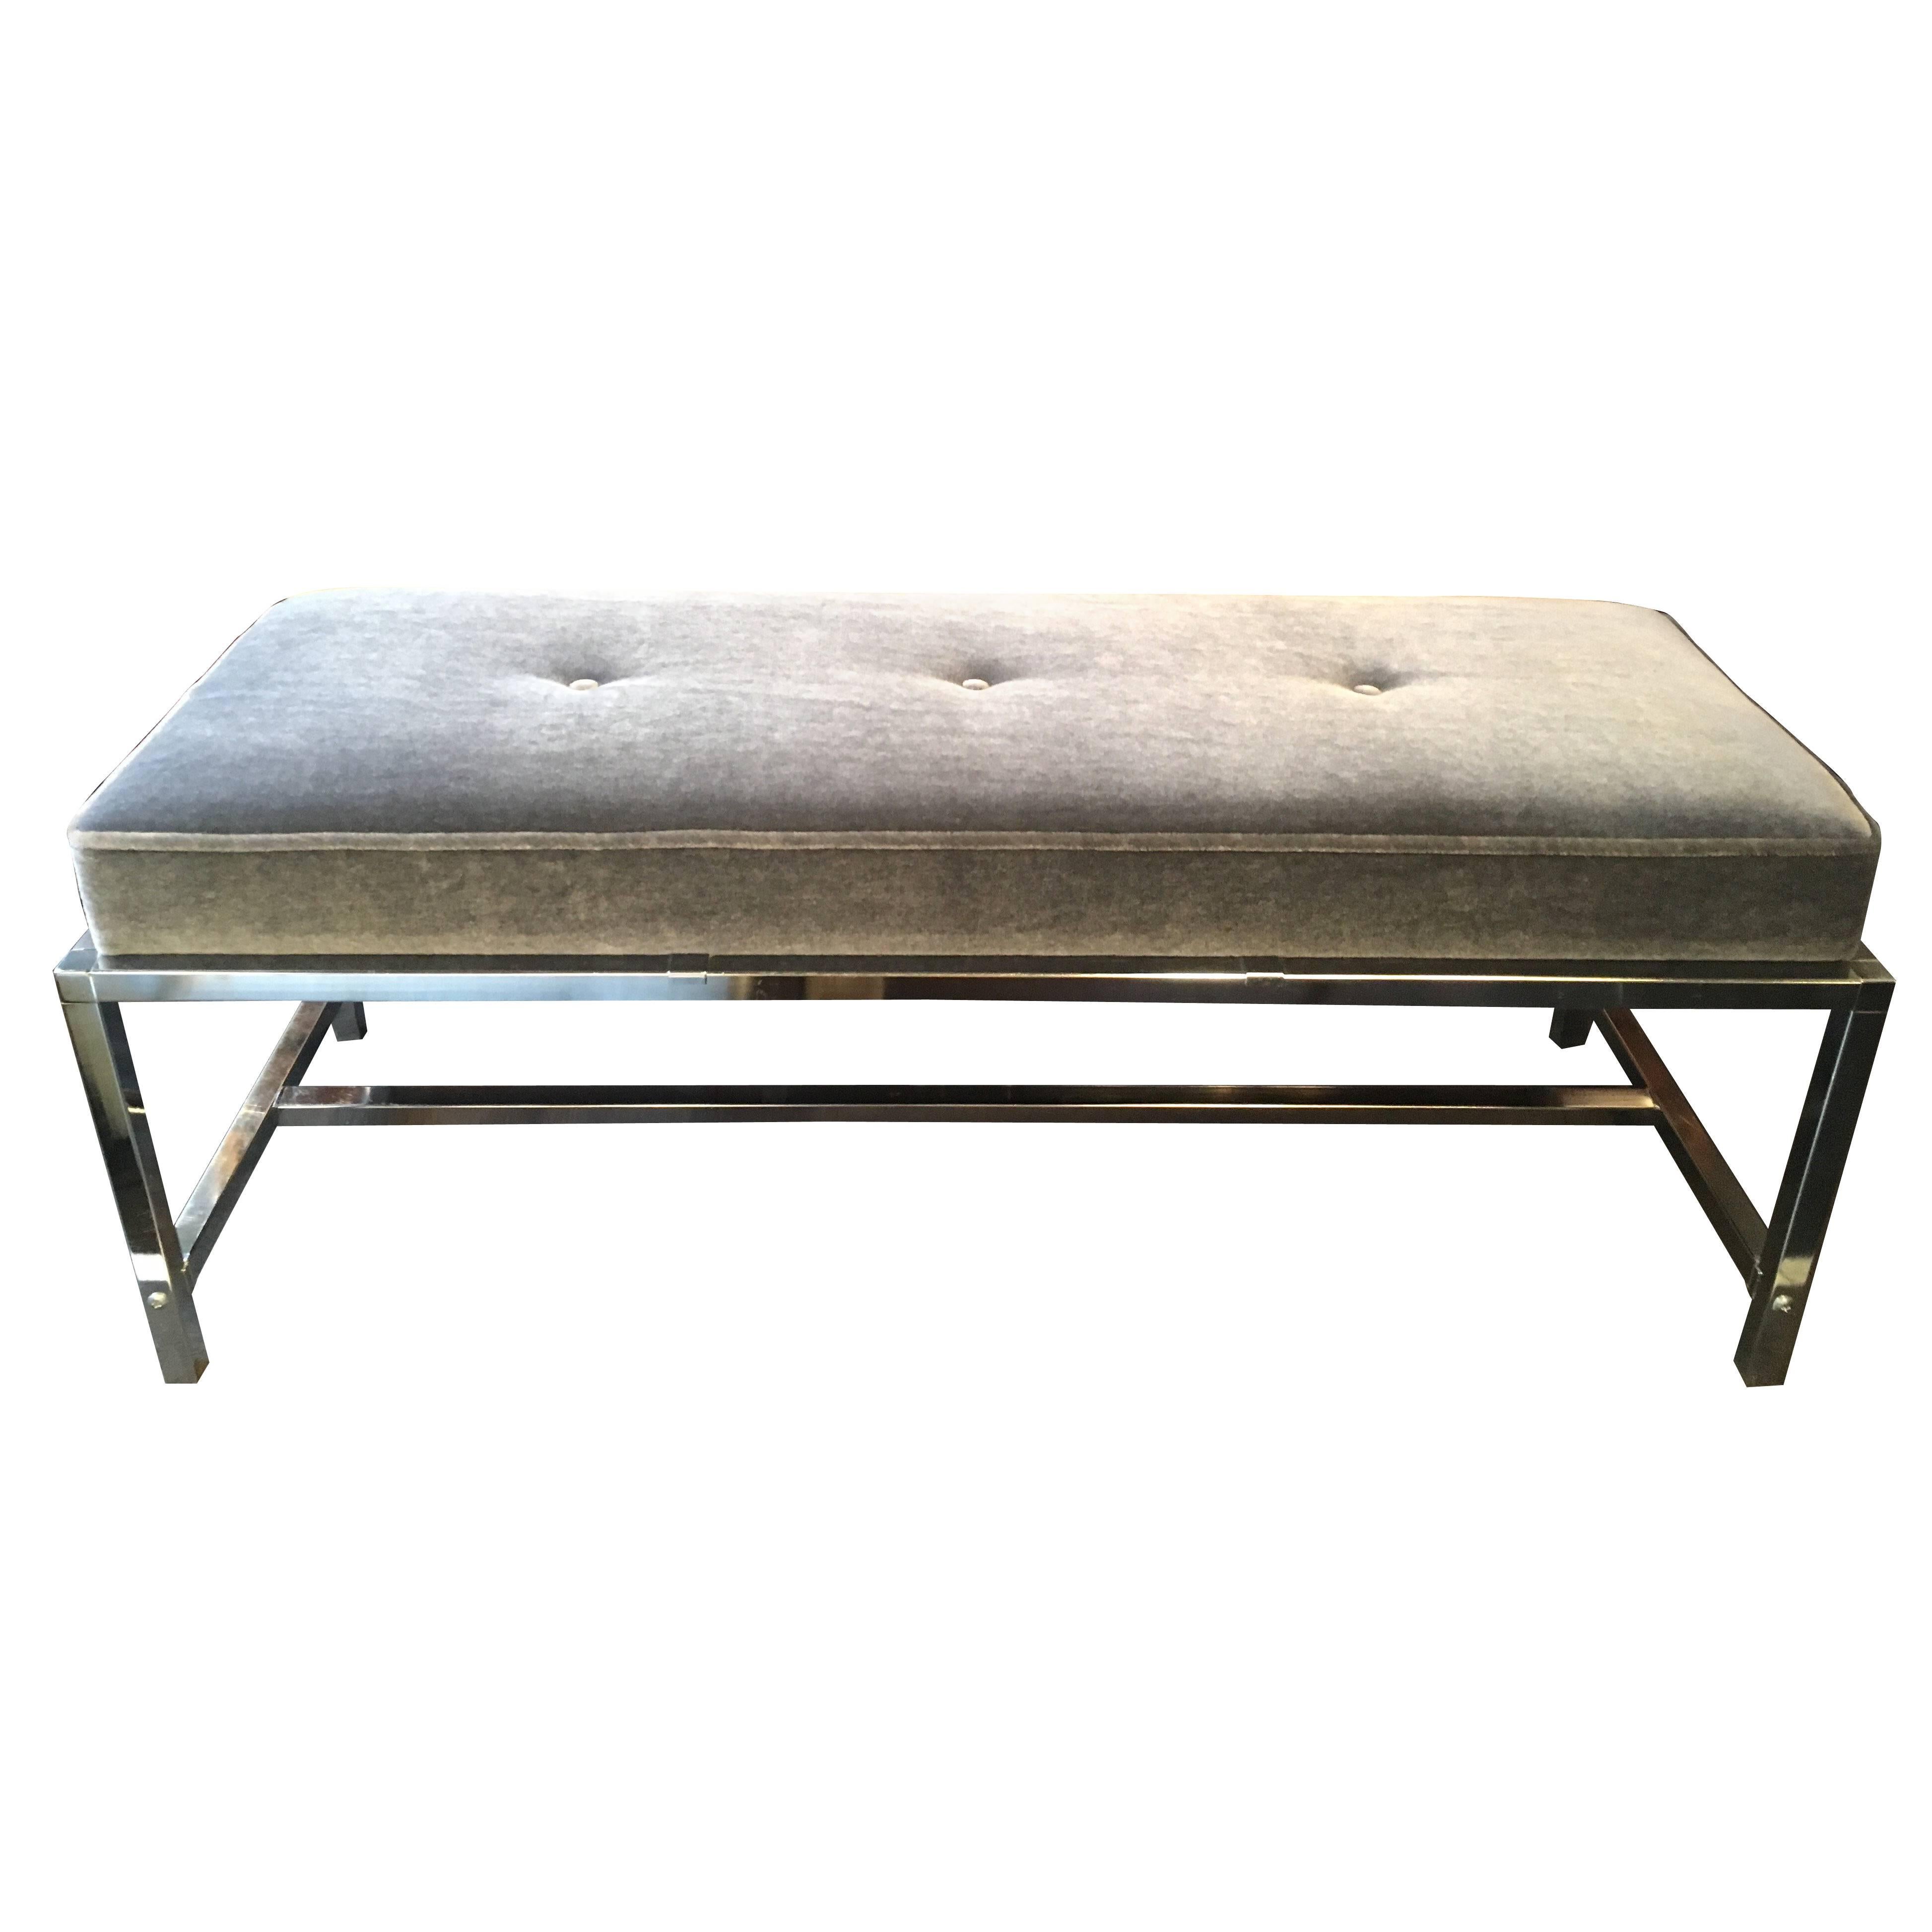 Mid-century modern bench newly upholstered in luxurious grey mohair.  Streamline design and features polished chrome over steel base with center crossbars. Has three button accents and self welt edges. 